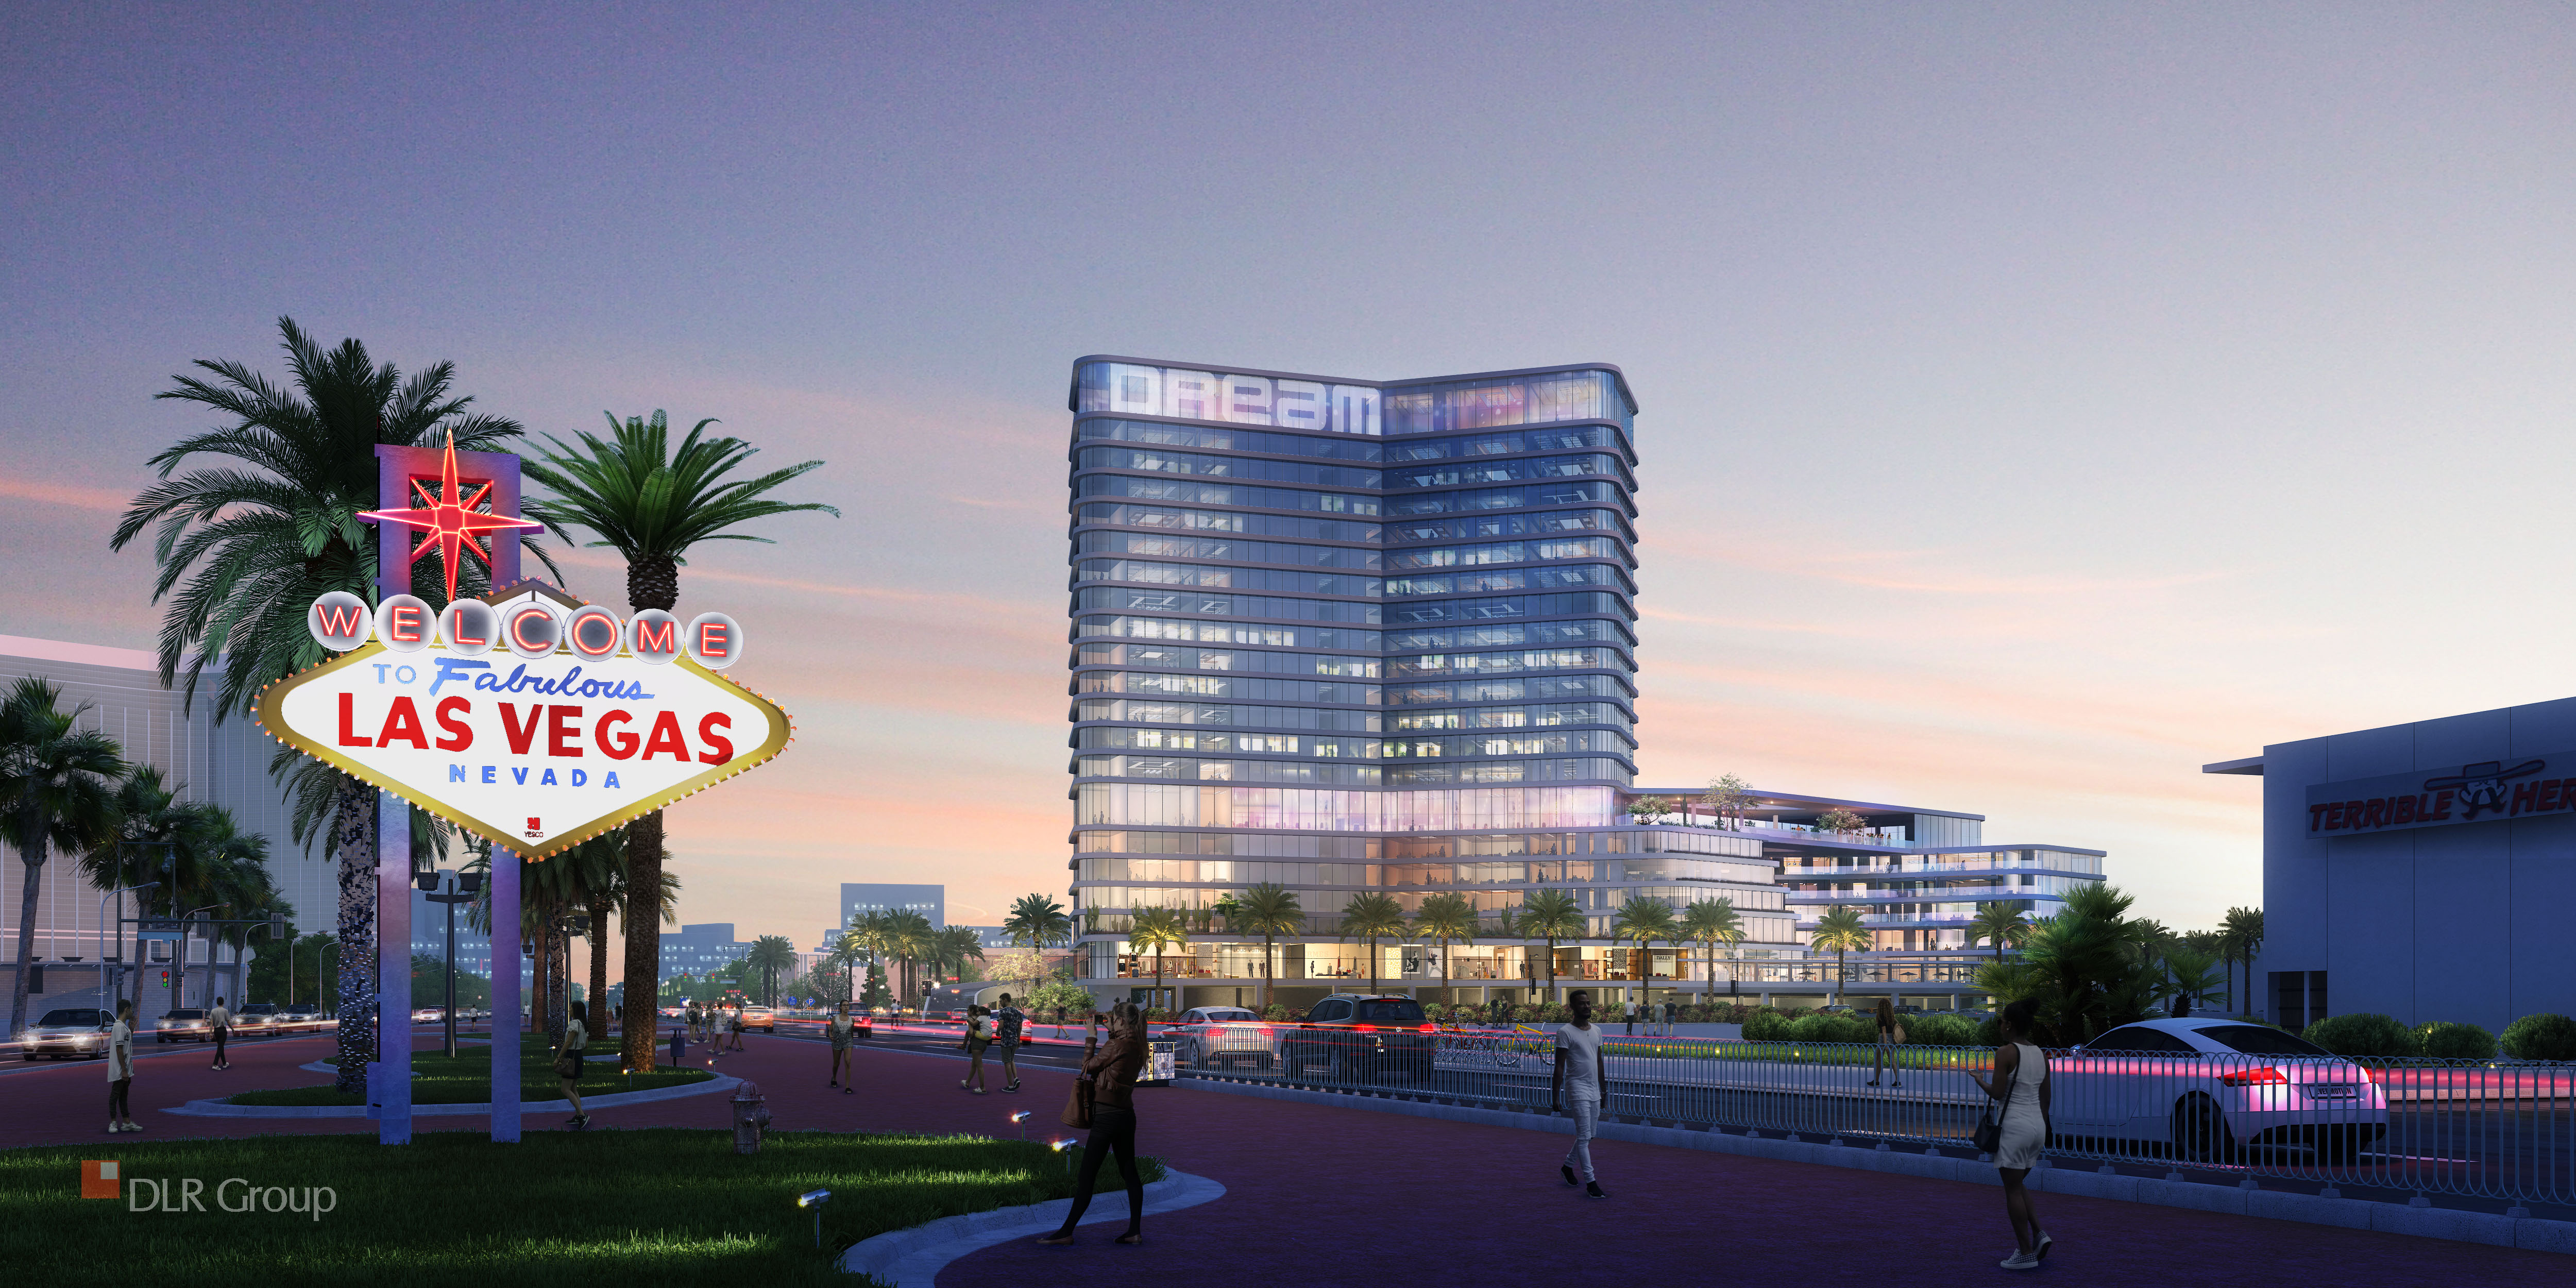 Dream Las Vegas set to open with 450 guest rooms & suites and seven dynamic dining & nightlife venues, including epic rooftop pool deck, bar and lounge, and two additional bar & lounge concepts on the gaming floor, in 2023.